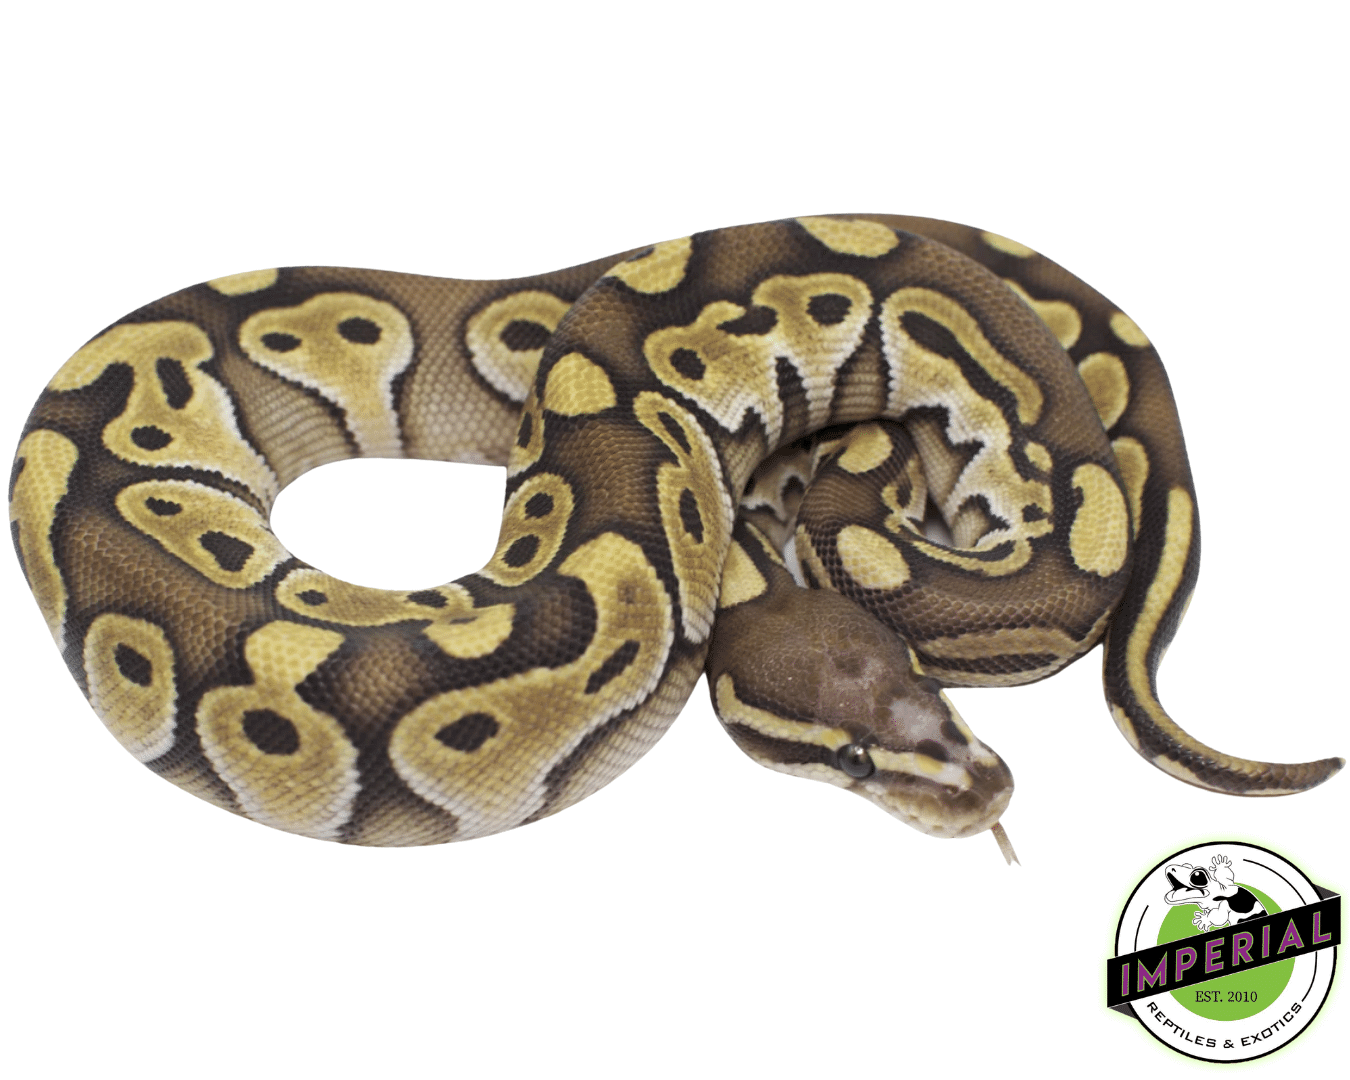 Lesser Scaleless Head ball python for sale, buy reptiles online